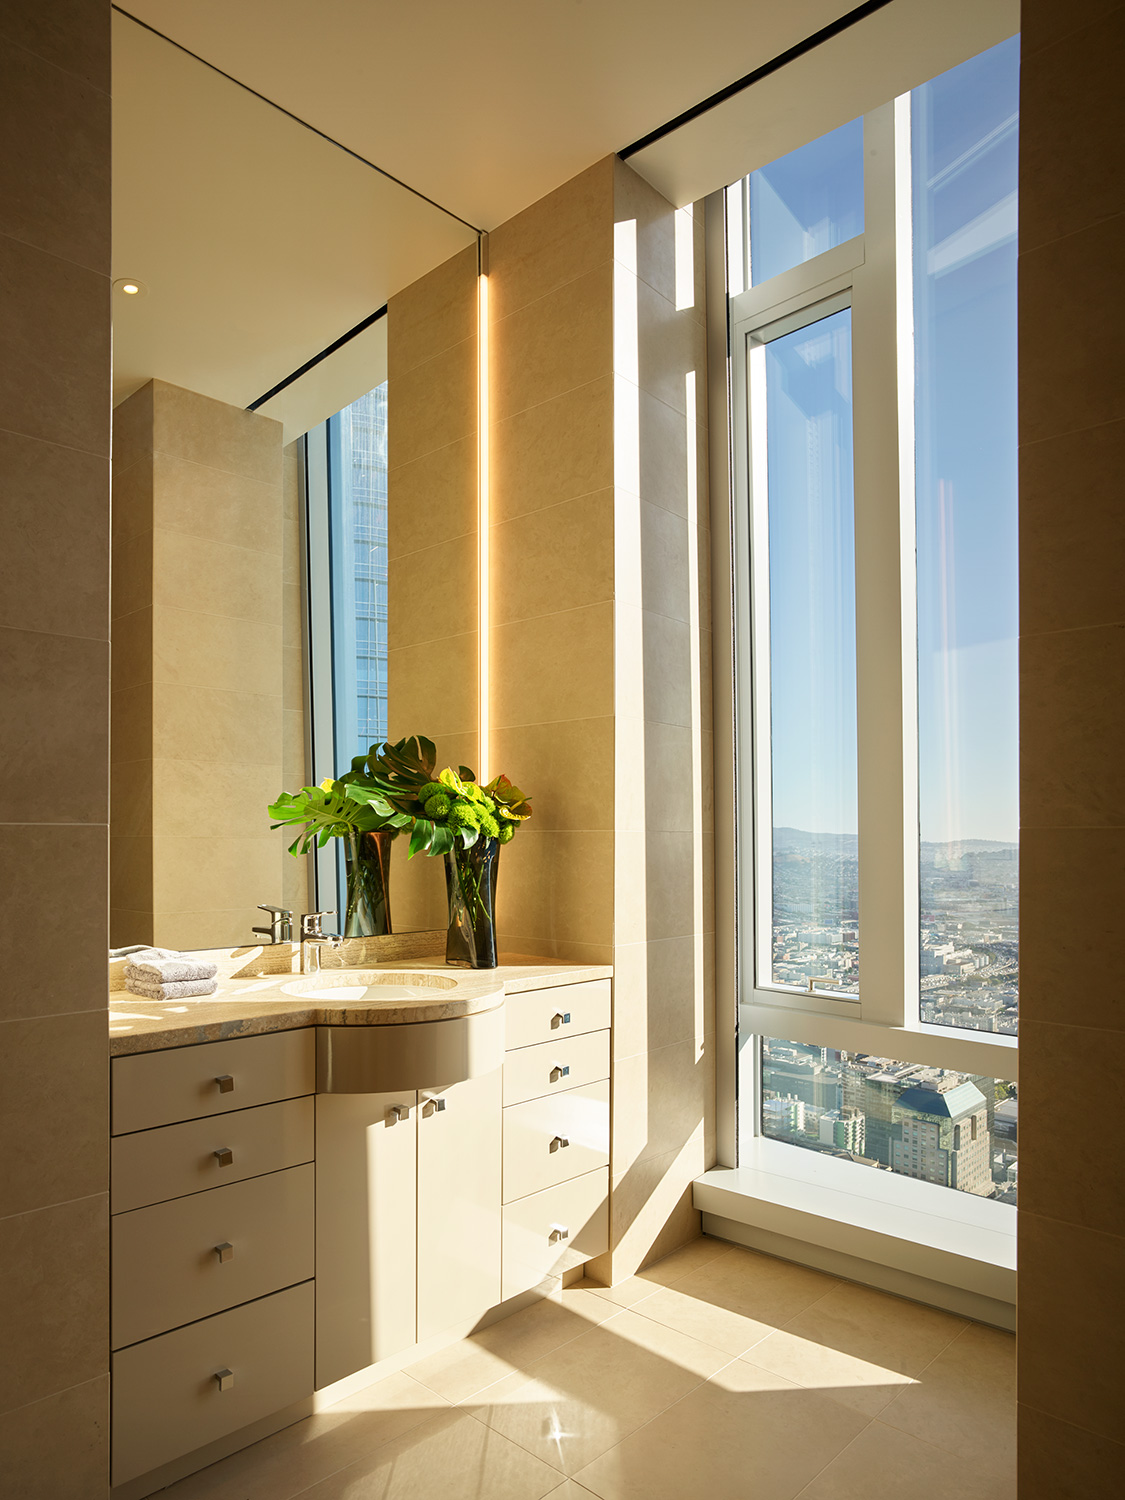 Grand Penthouse en-suite bathroom with light flowing in